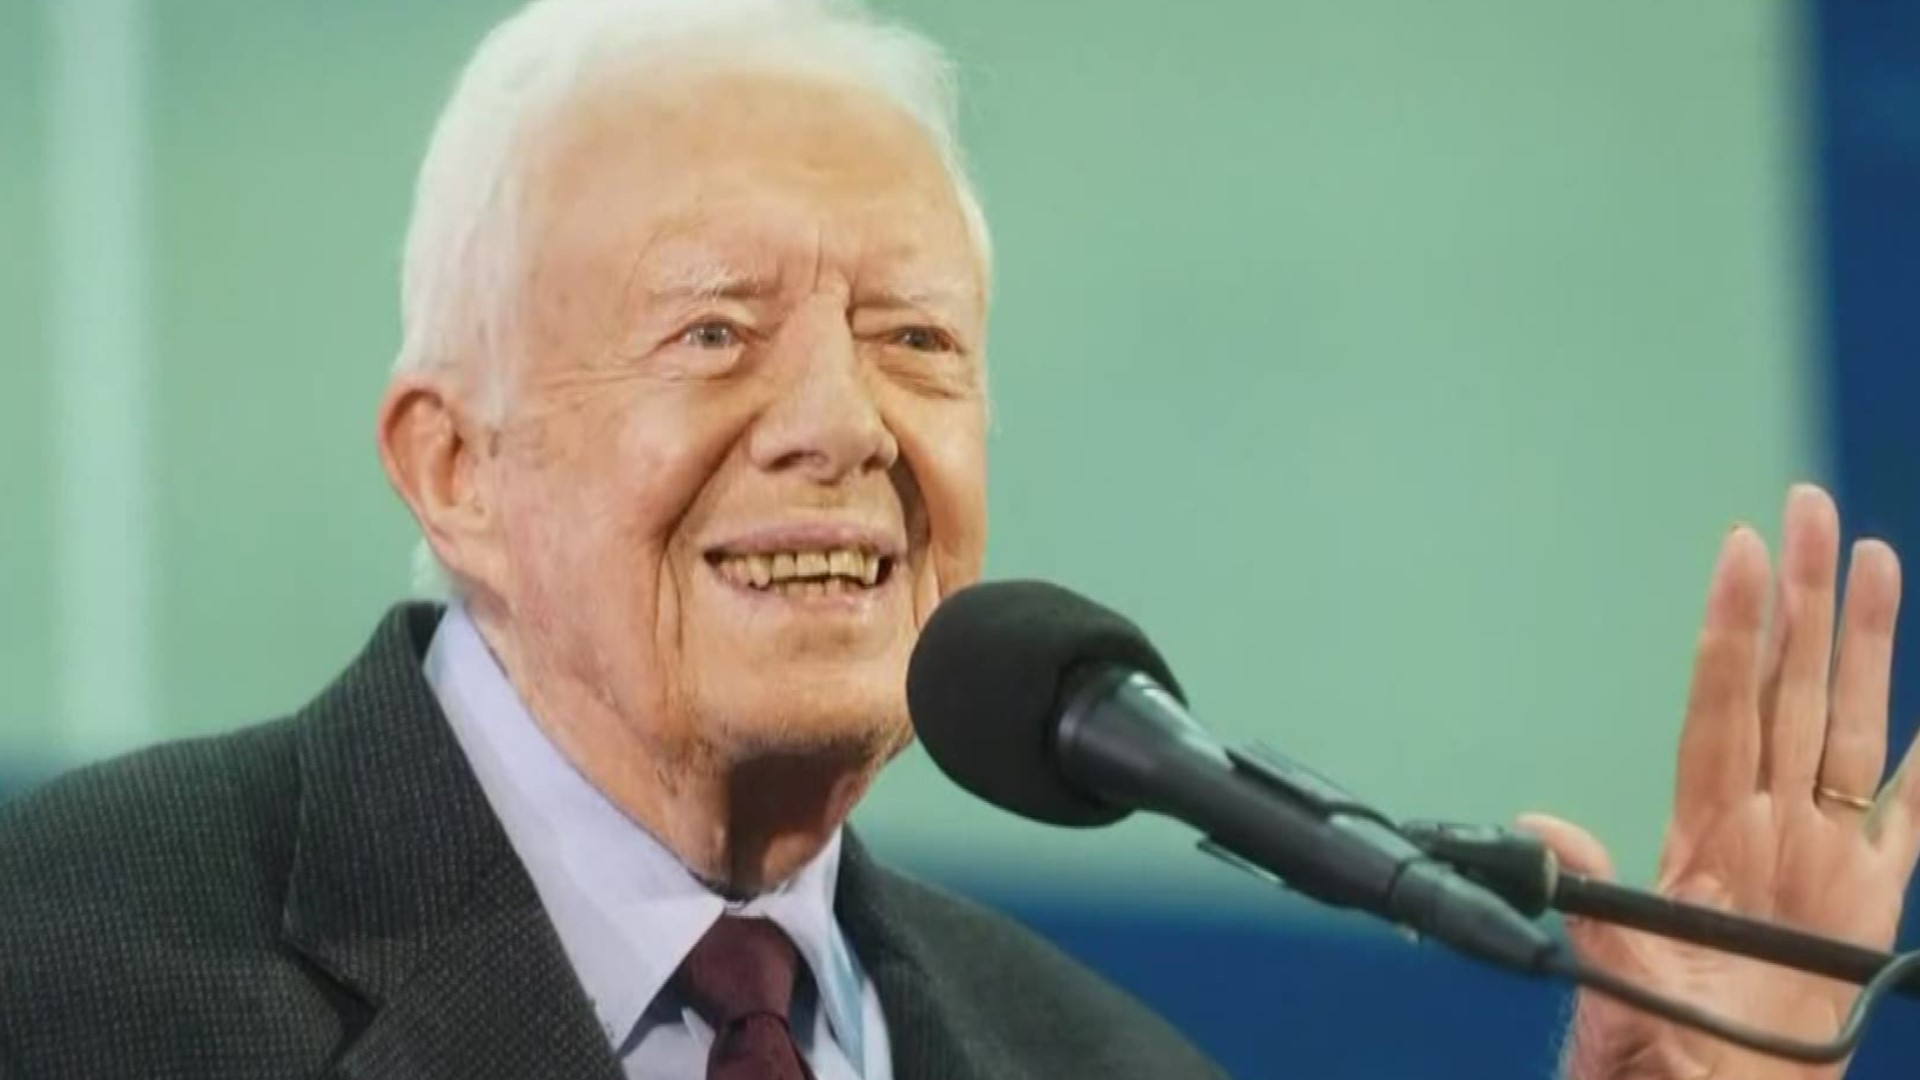 There were no complications from the surgery and President Carter will remain in the hospital "as long as advisable for observation" the Carter Center said.